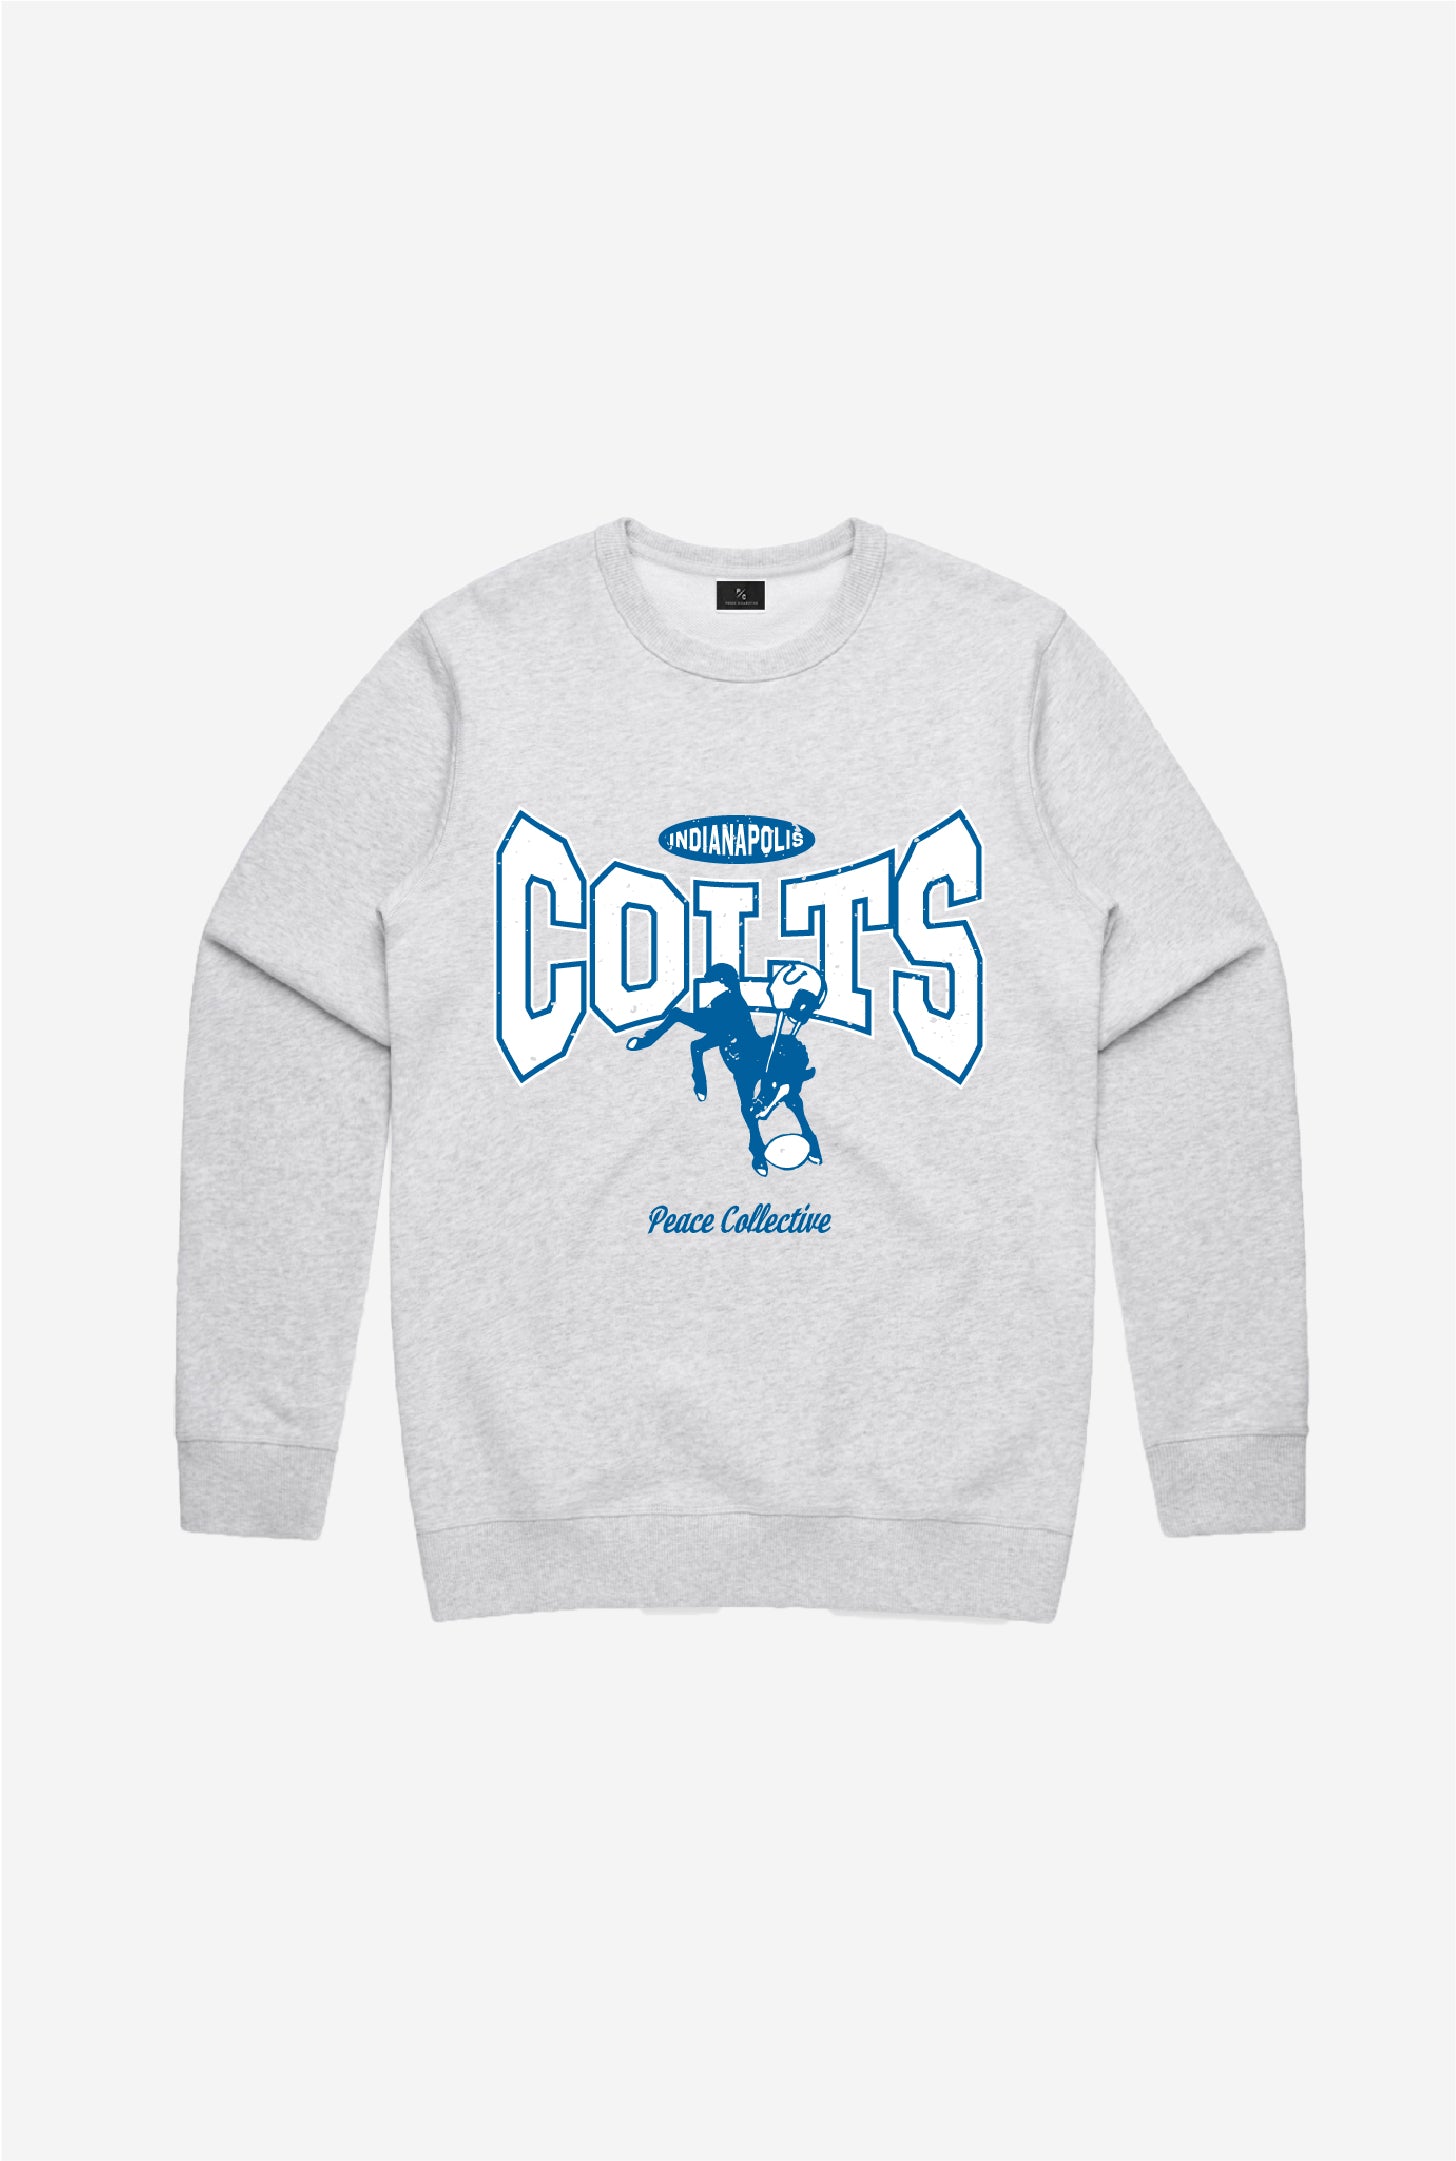 Indianapolis Colts Washed Graphic Crewneck - Ash